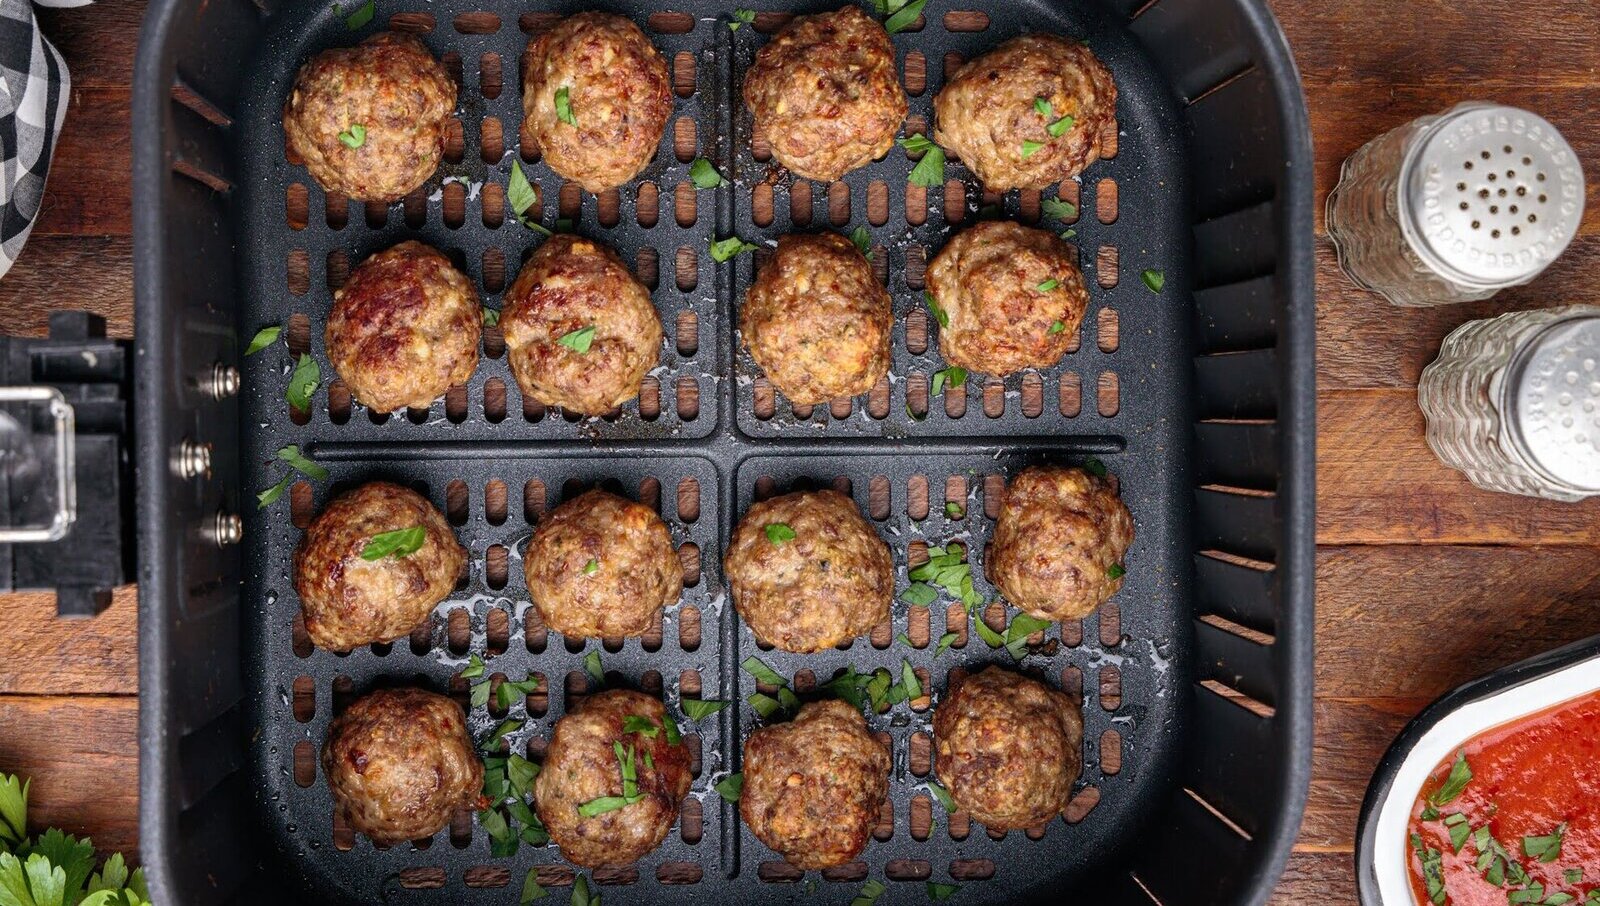 How To Cook Meatballs In The Air Fryer